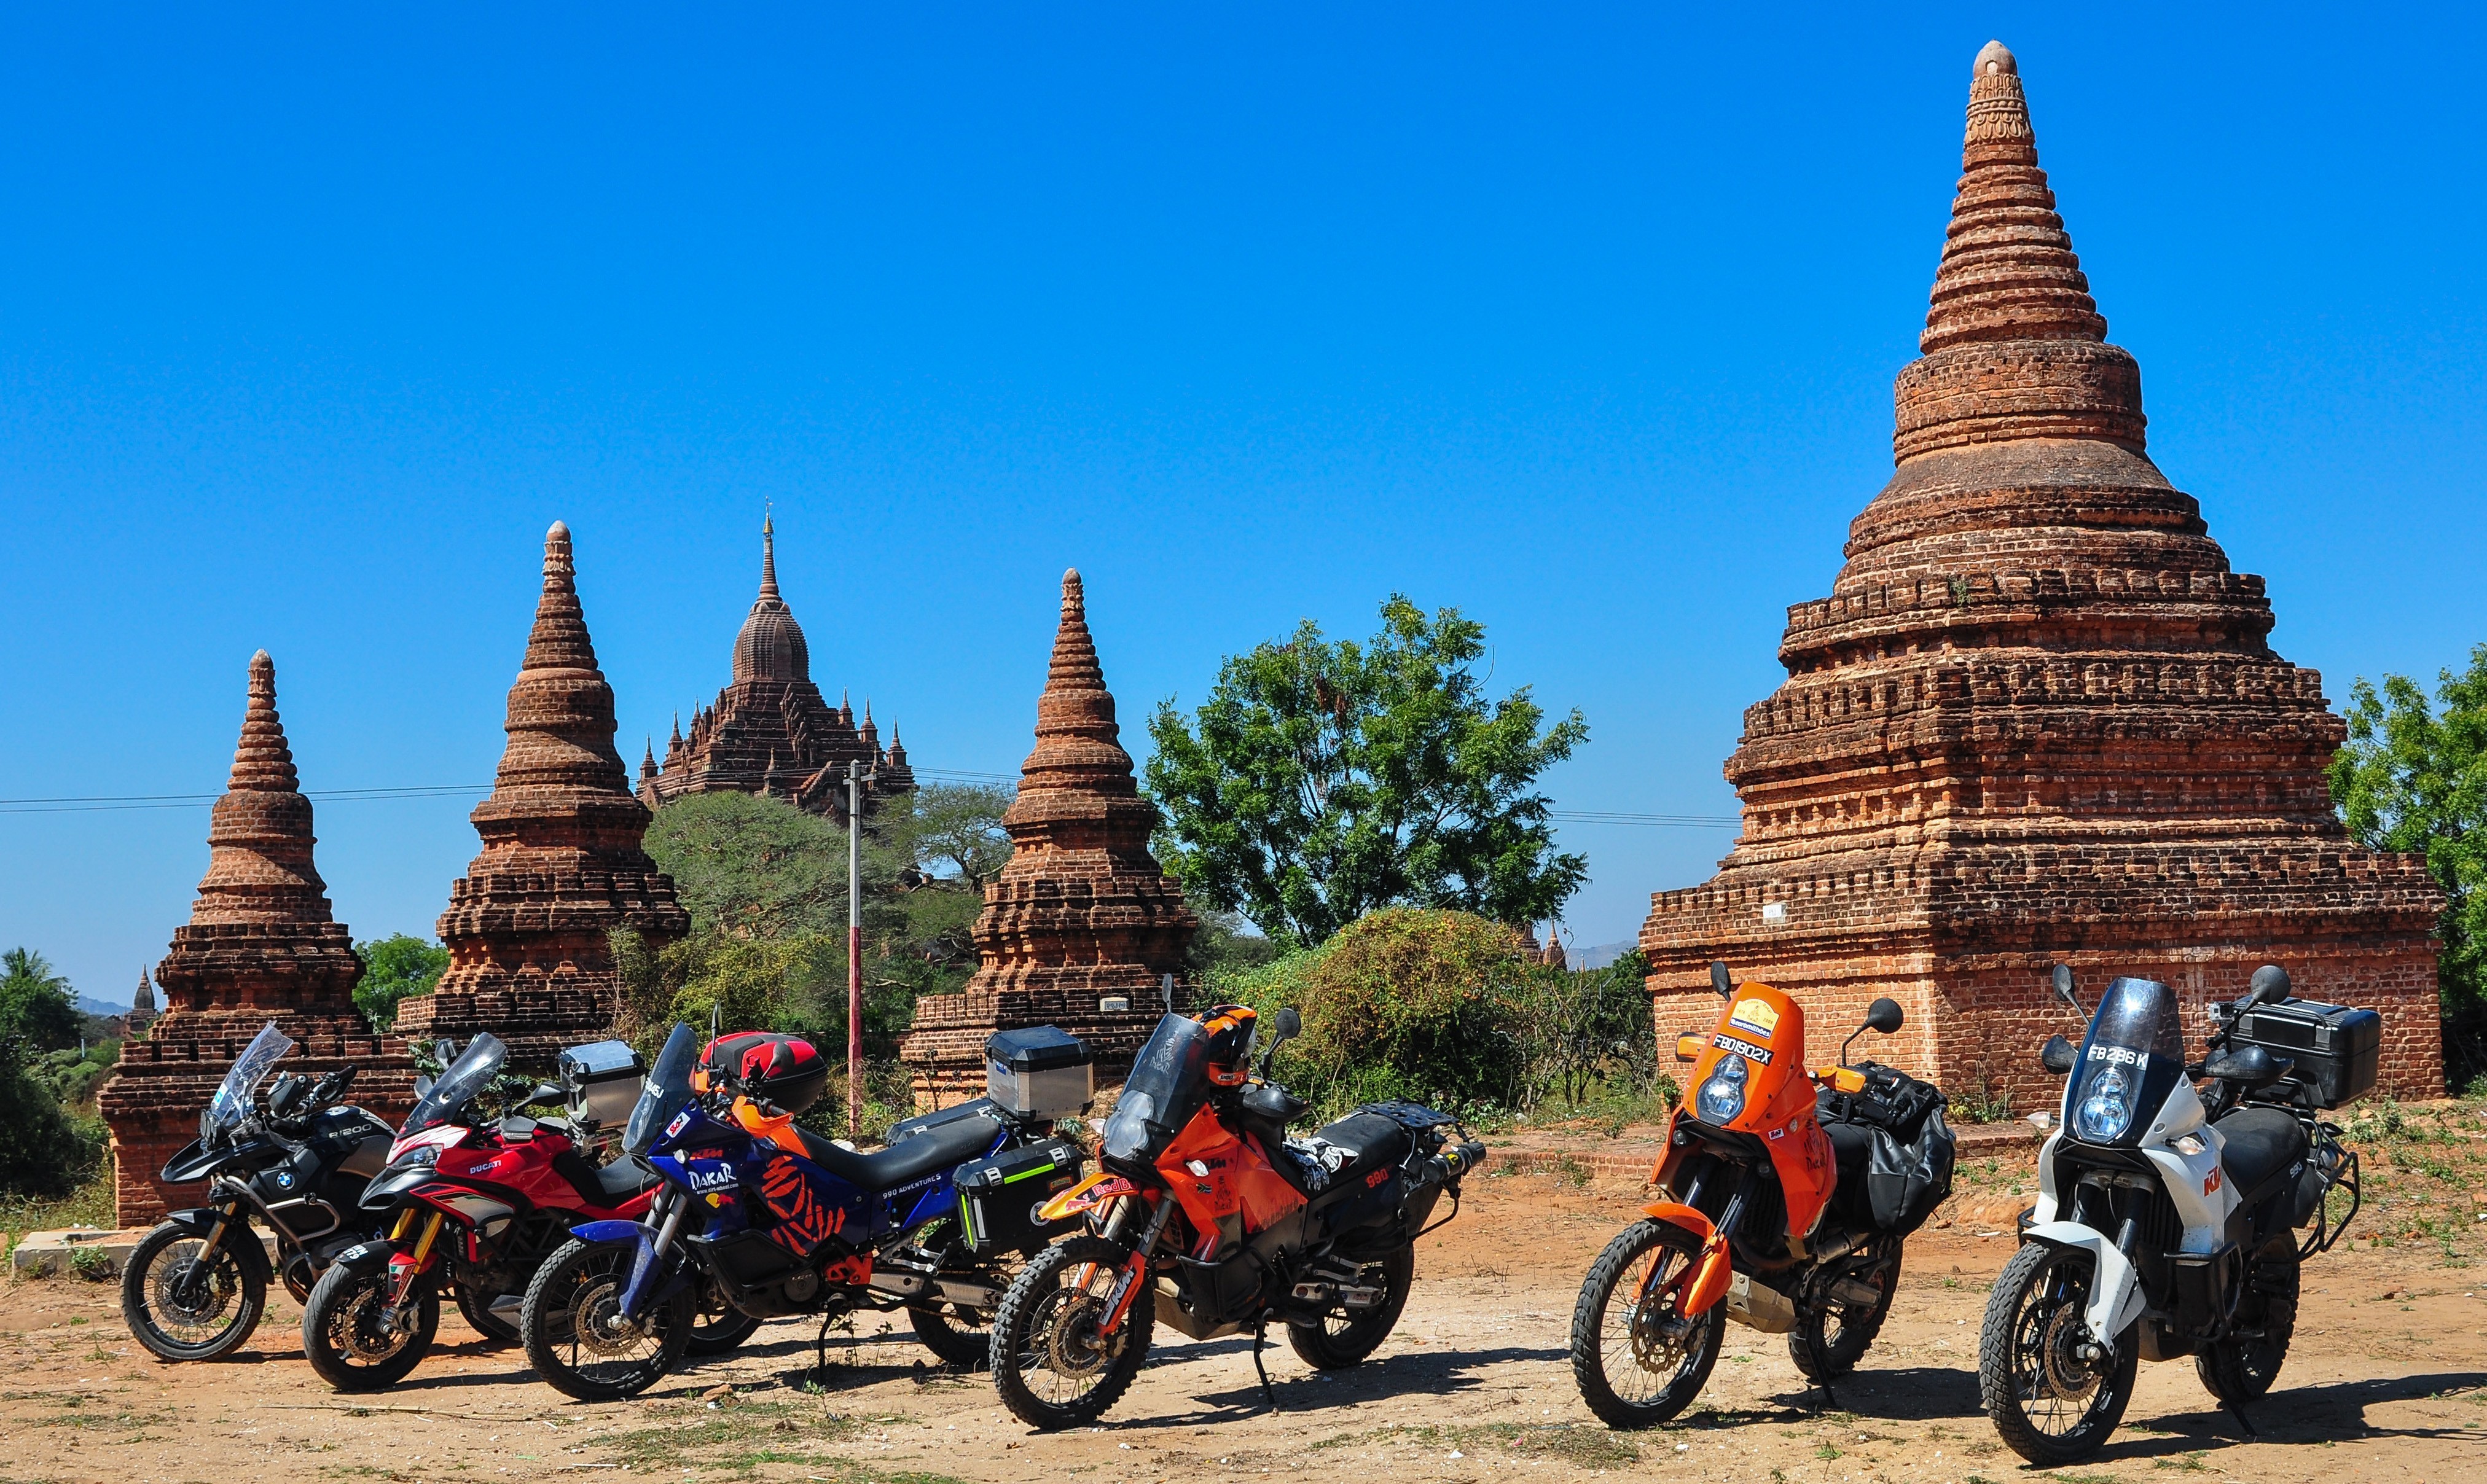 Myanmar motorcycle tours with Motoasia. Travel Thailand to Myanmar, riding through the unique 2000 Pagodas of ancient Bagan with our adventure tour.